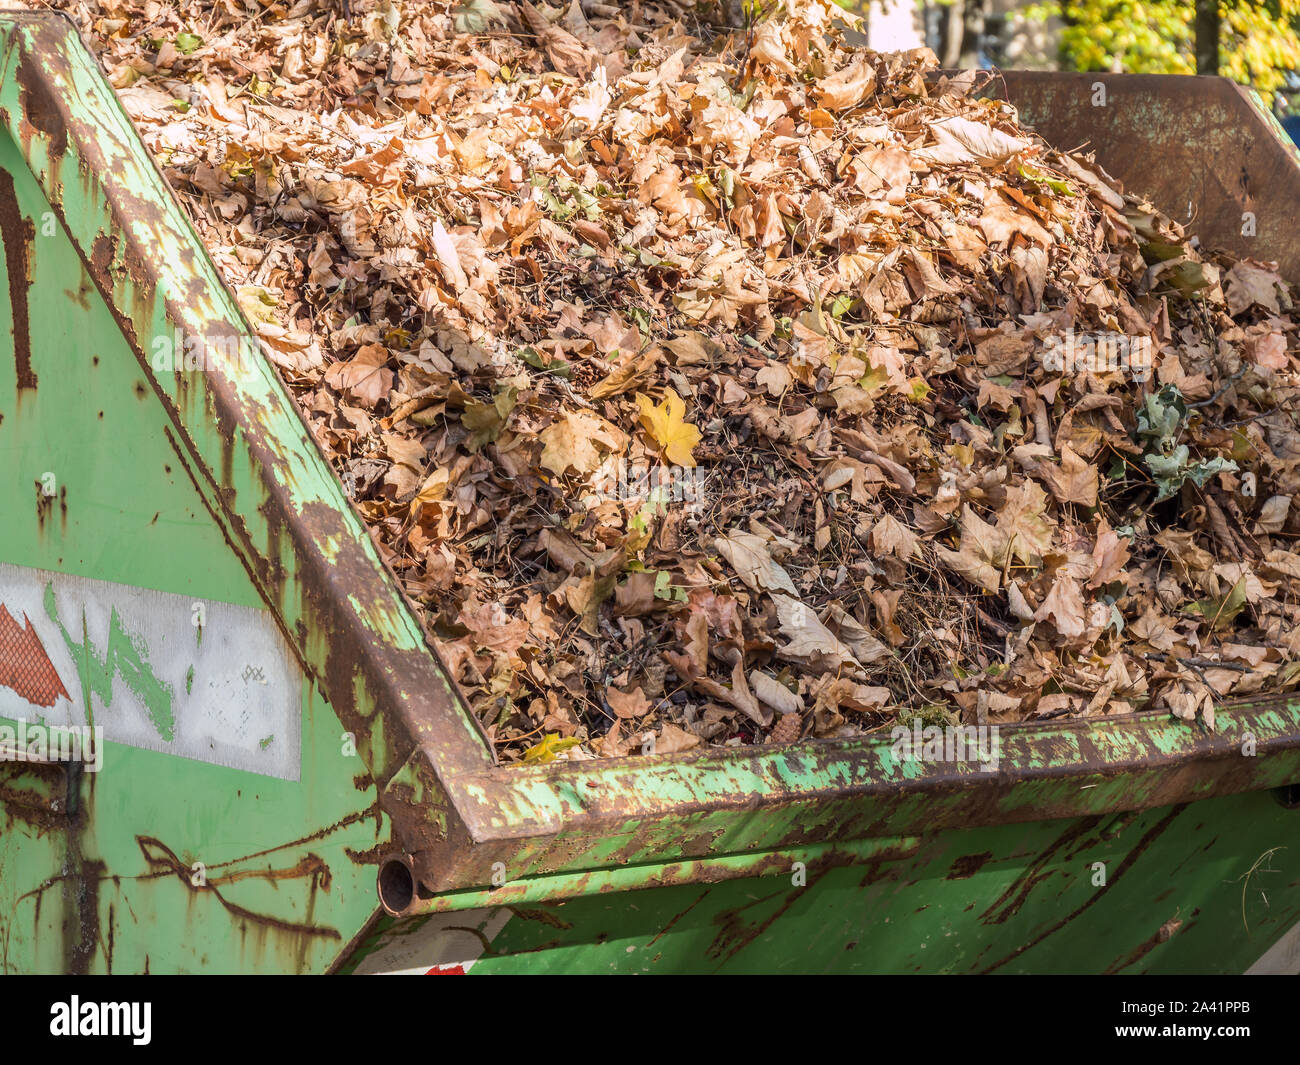 Container with garden waste in the autumn Stock Photo